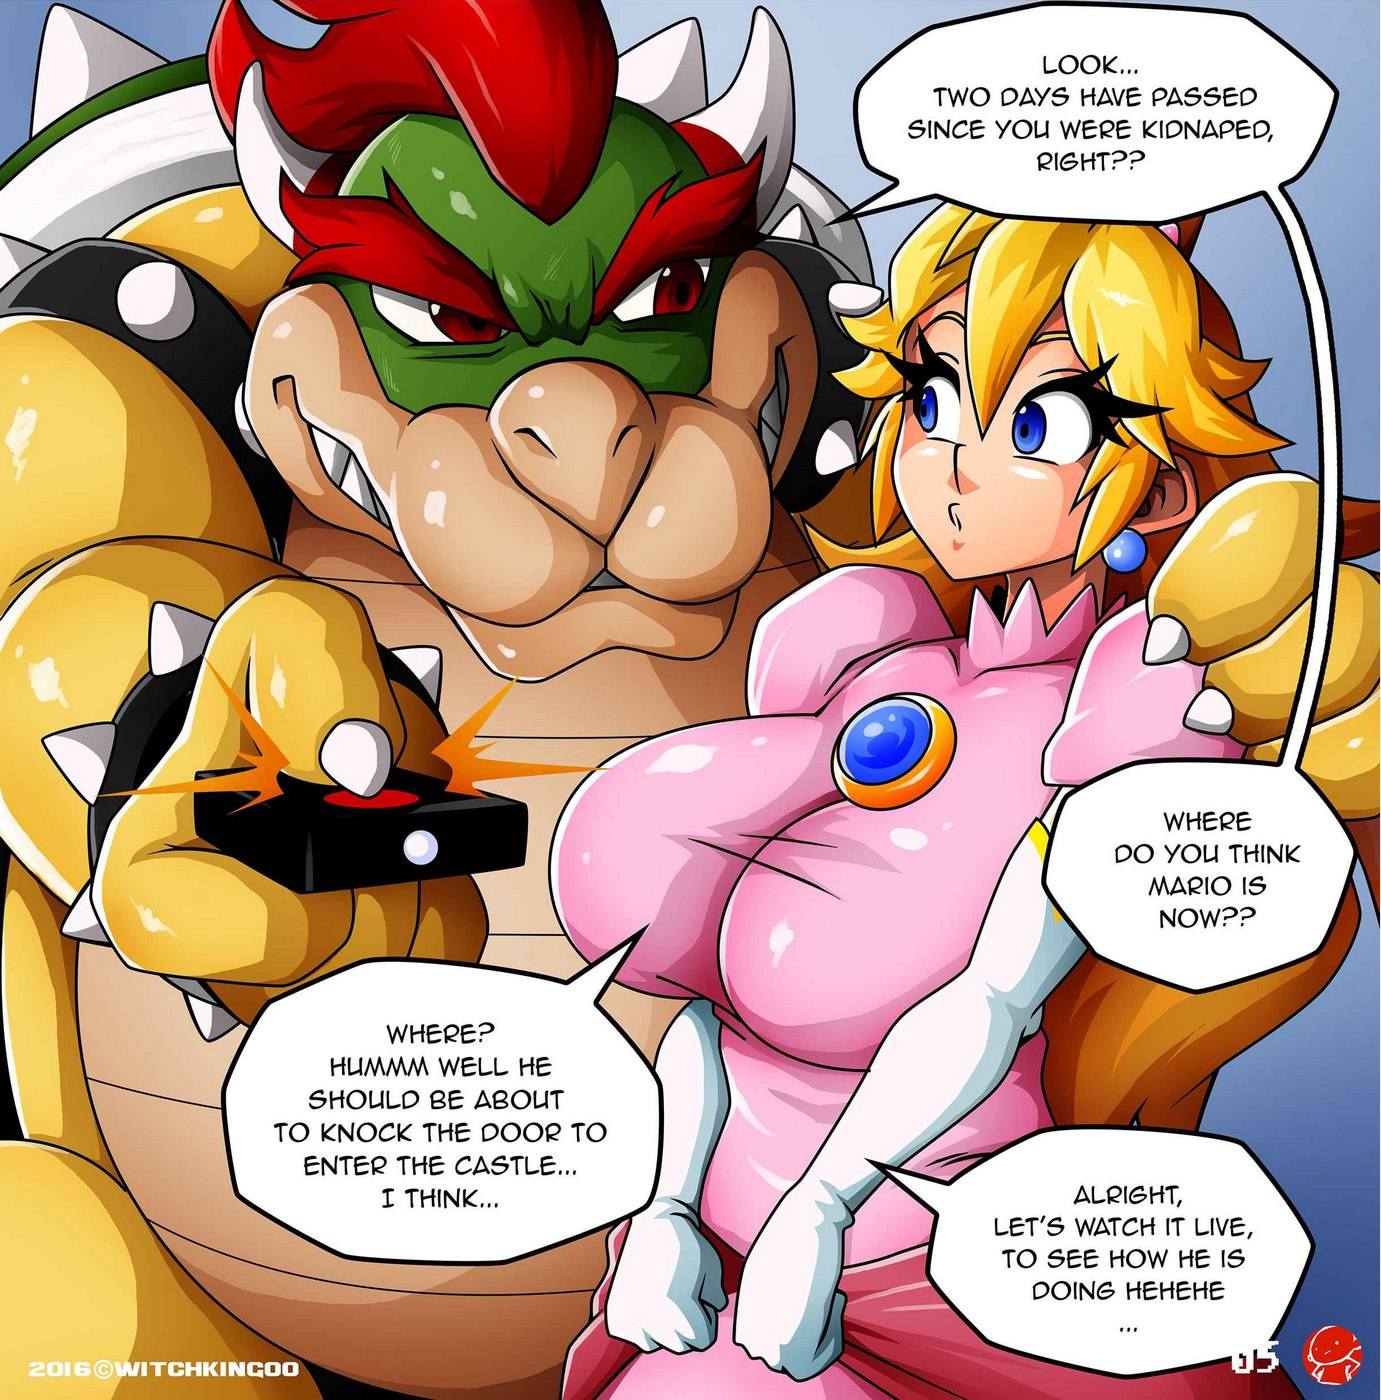 Help Me Mario! The Prequel â€“ Witchking00 - Comics Army